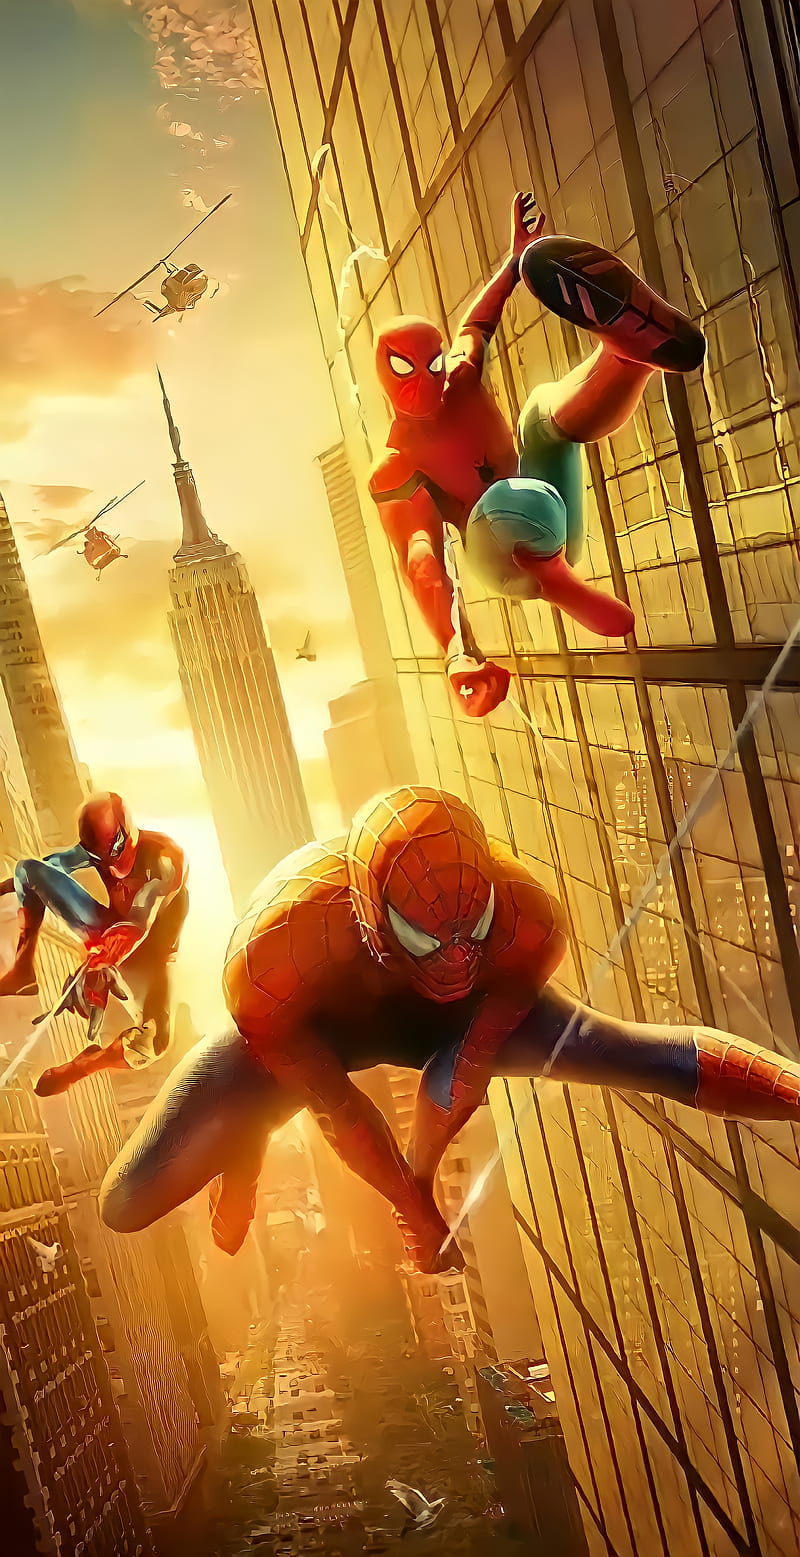 download the new version Spider-Man: No Way Home